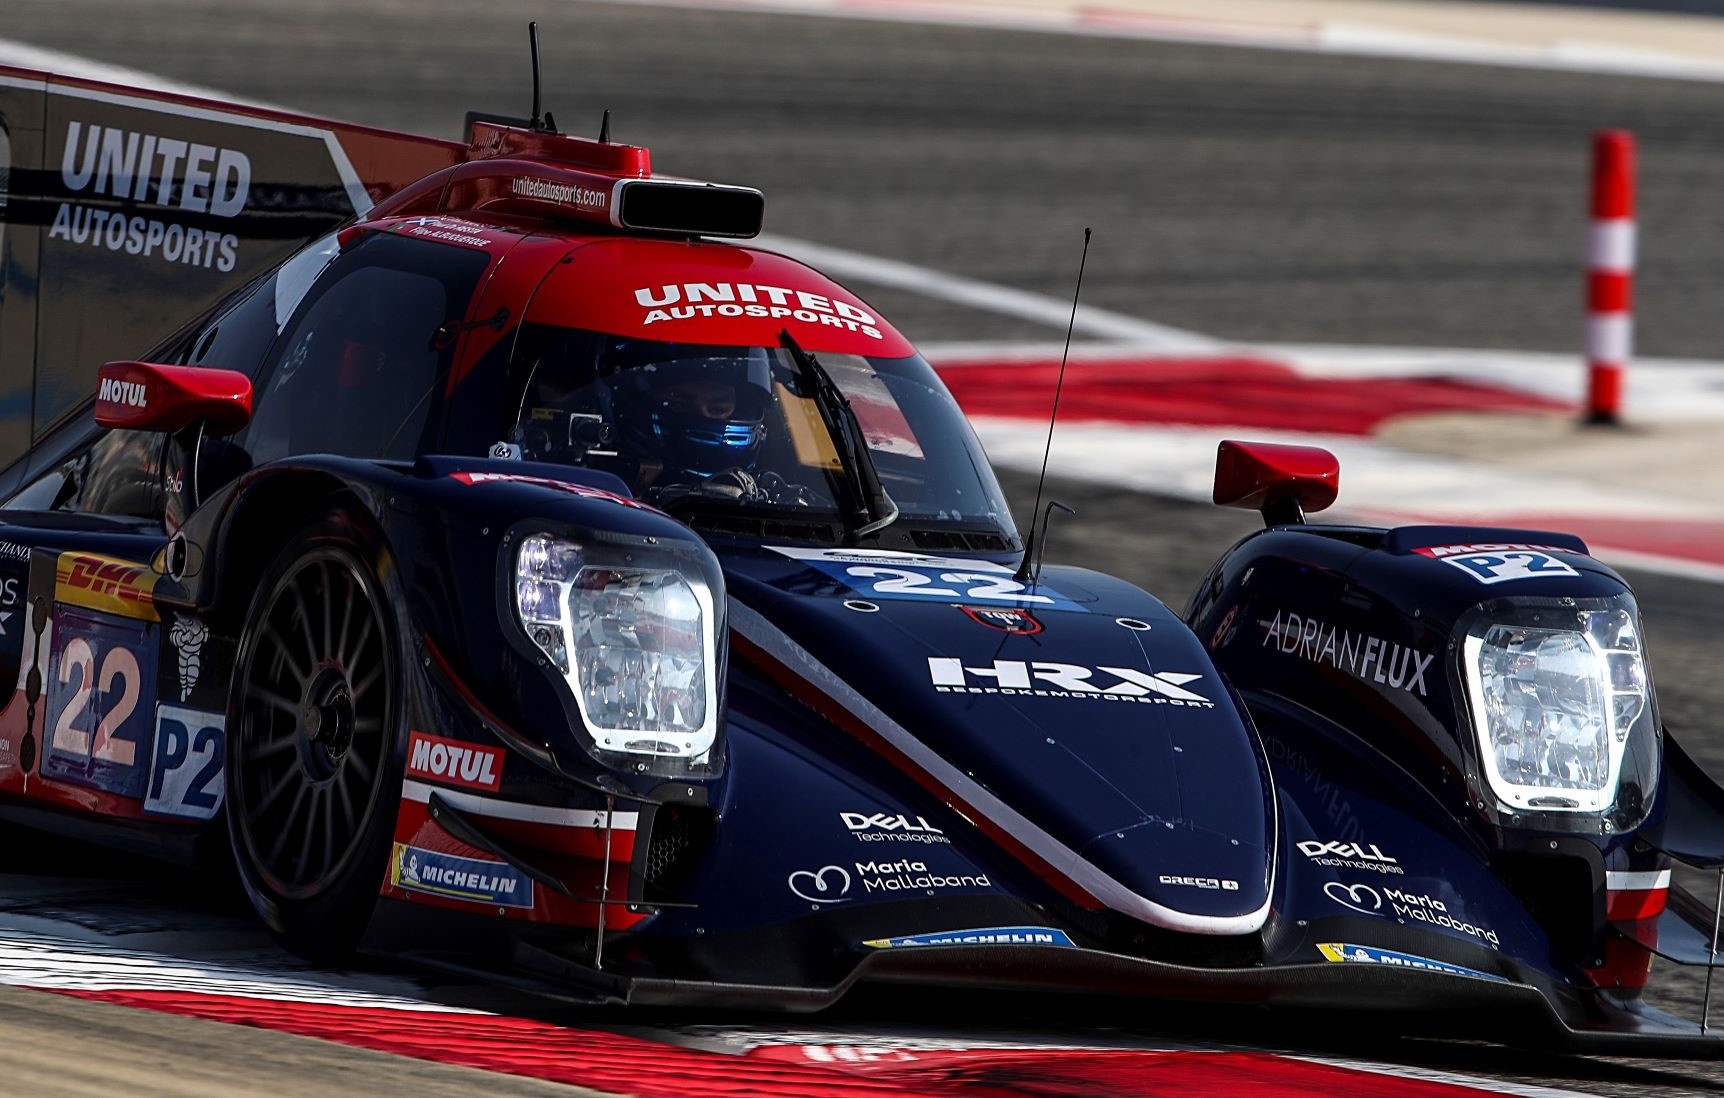 United Autosports driver Scherer will be missing in Portimao WEC after testing positive for COVID-19